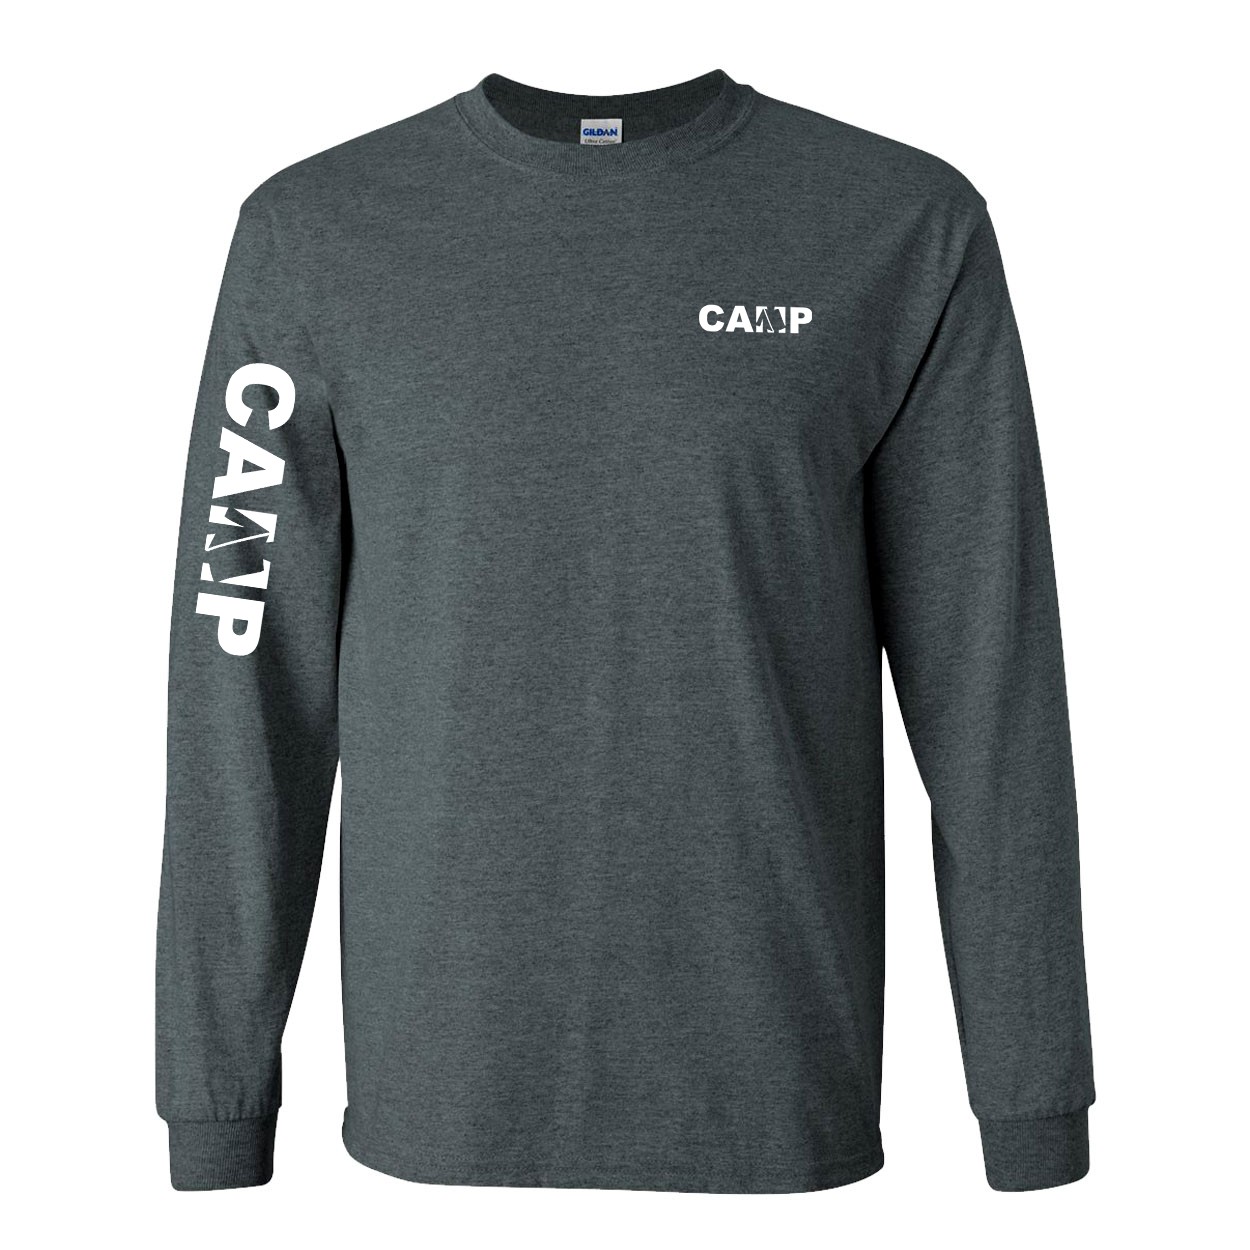 Camp Tent Logo Night Out Long Sleeve T-Shirt with Arm Logo Dark Heather Gray (White Logo)